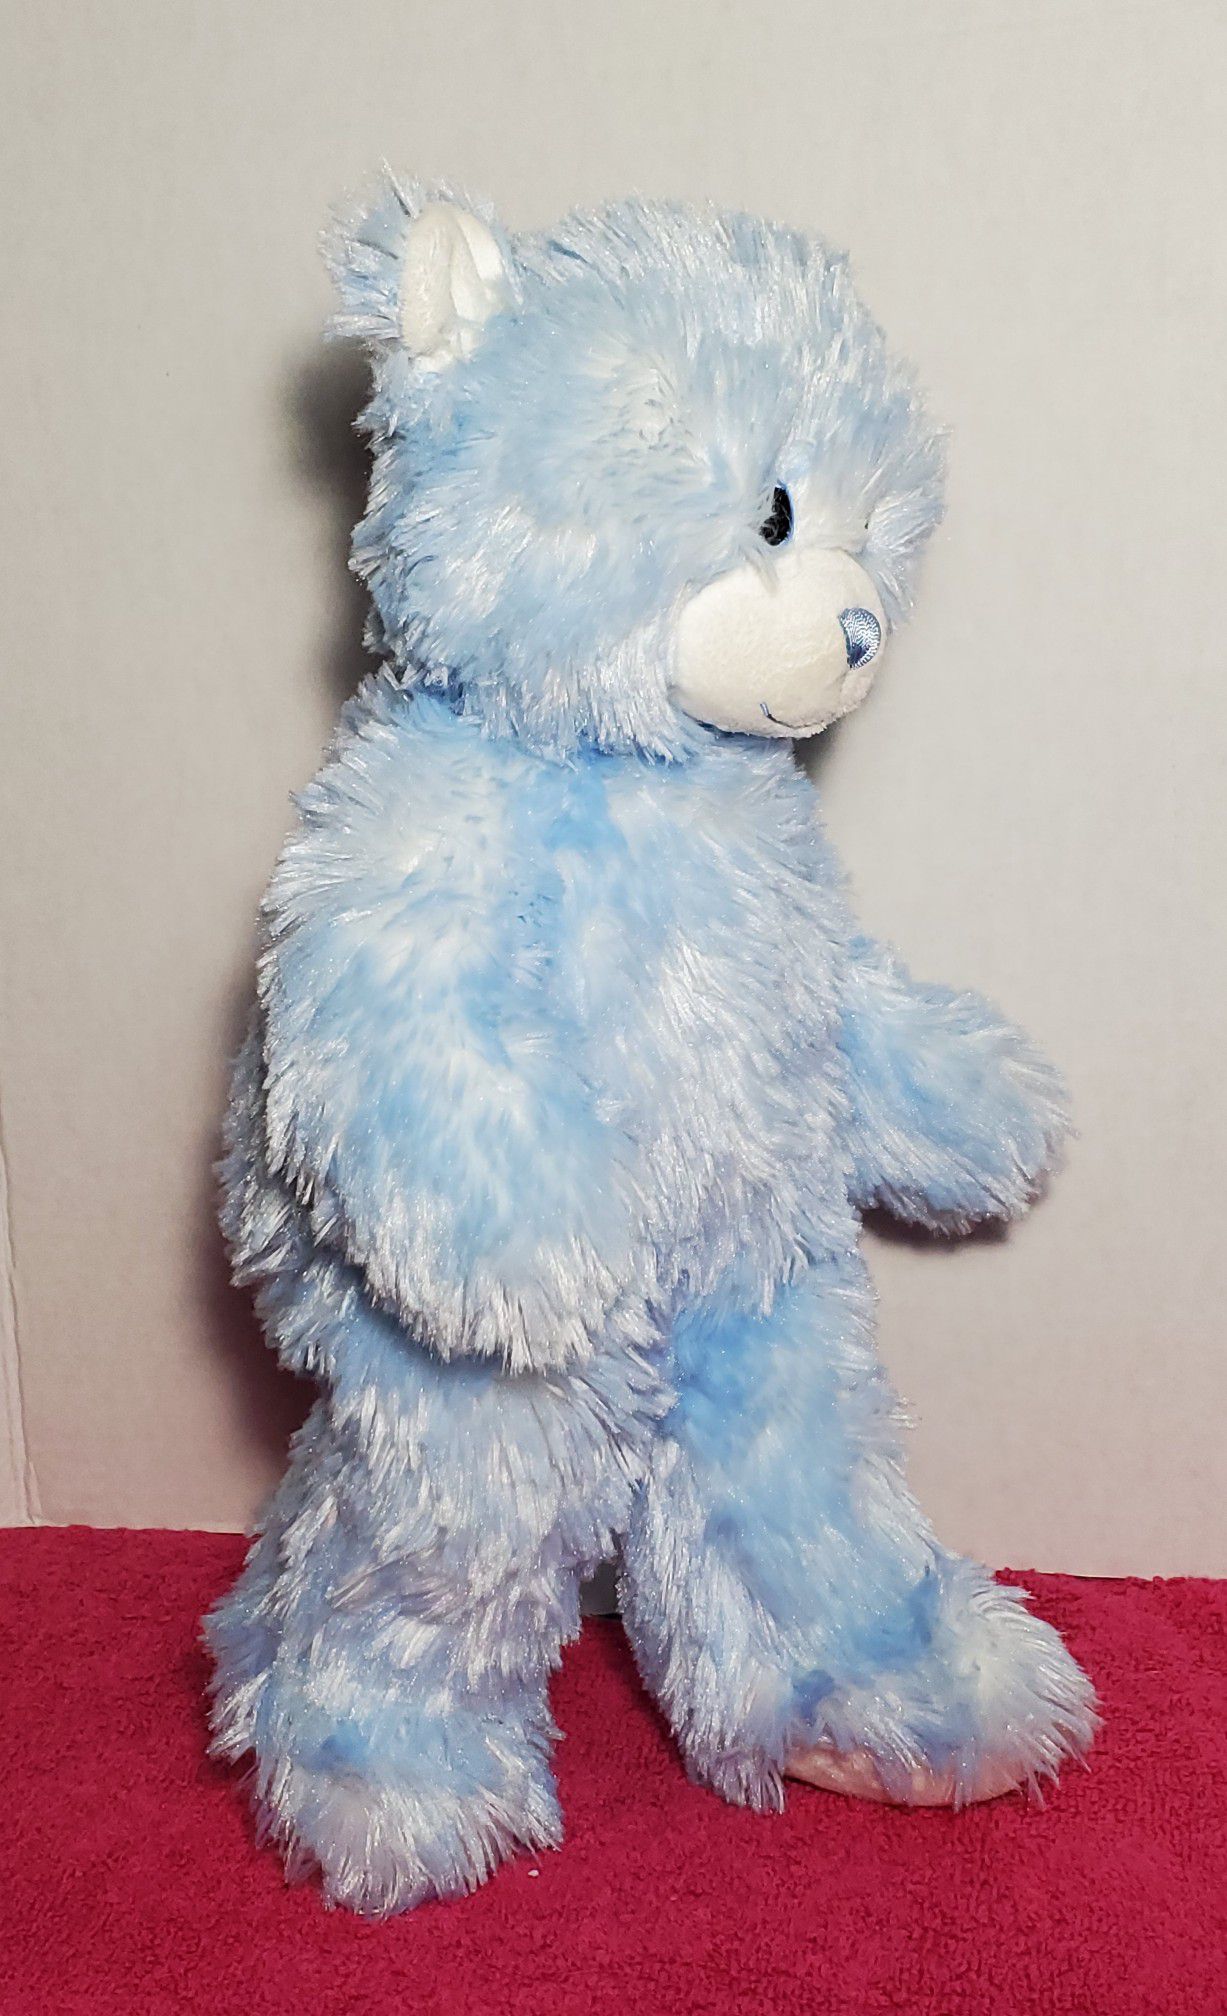 16" Build A Bear Pastel Baby Boy Blue Soft Shaggy Teddy Embroidered Eyes Easter